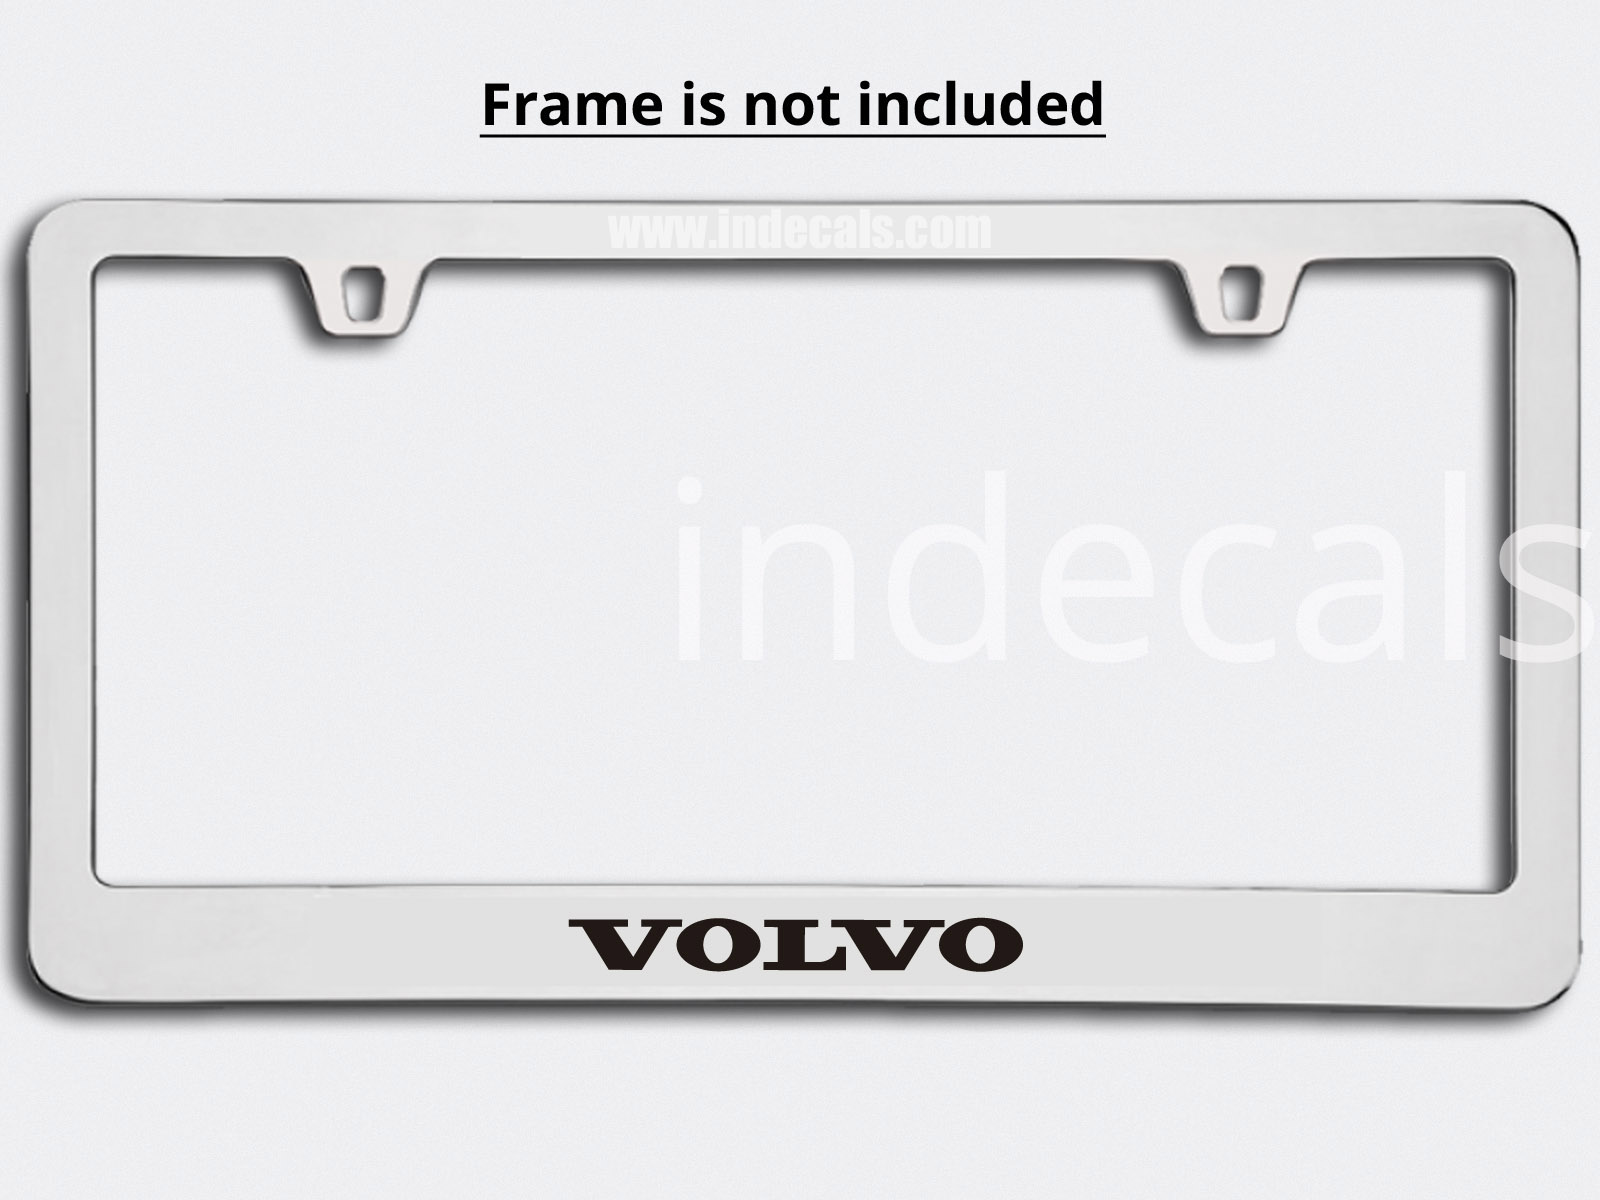 3 x Volvo Stickers for Plate Frame - Black